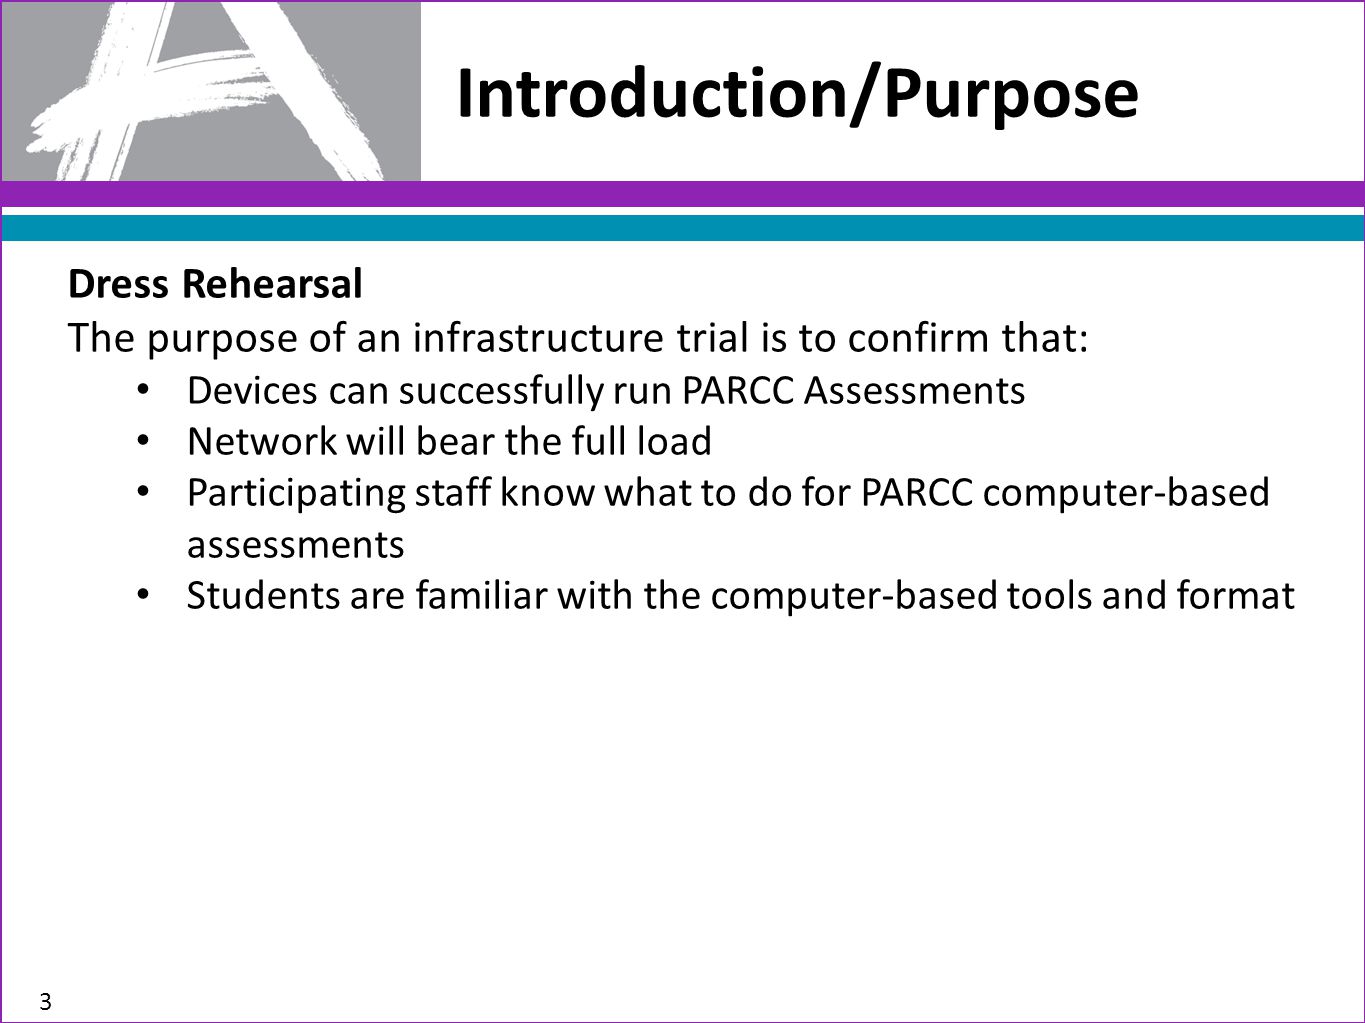 Introduction/Purpose 3 Dress Rehearsal The purpose of an infrastructure trial is to confirm that: Devices can successfully run PARCC Assessments Network will bear the full load Participating staff know what to do for PARCC computer-based assessments Students are familiar with the computer-based tools and format